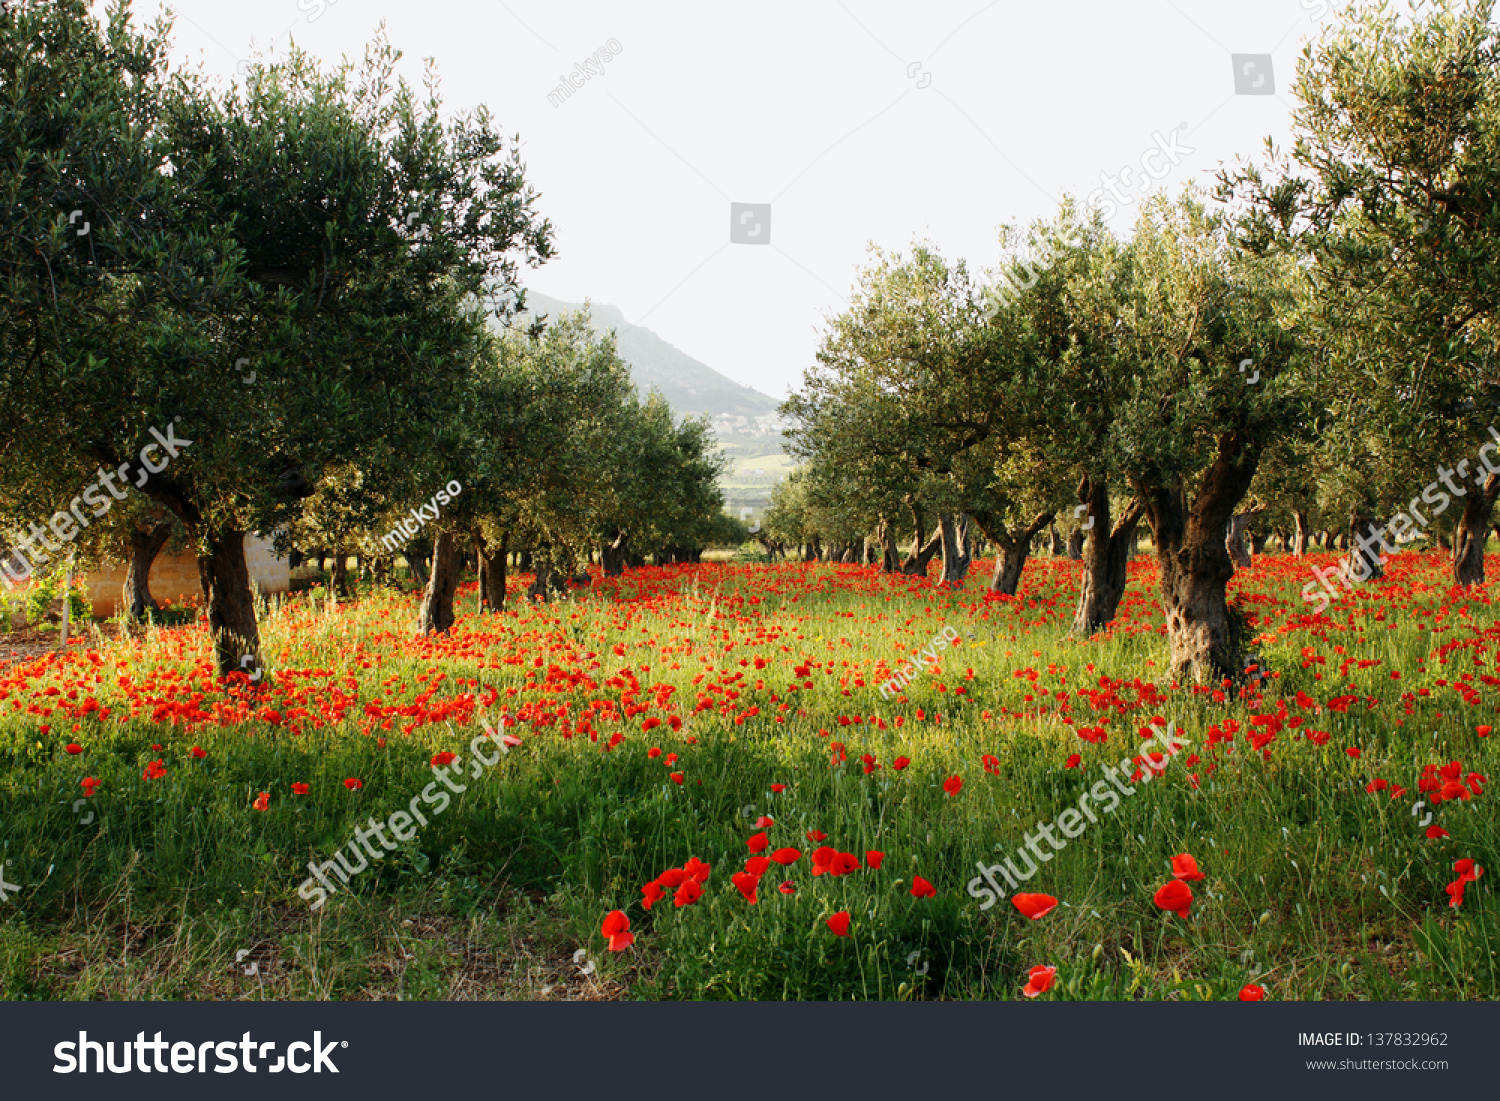 Trees of olives on a field of poppies #137832962